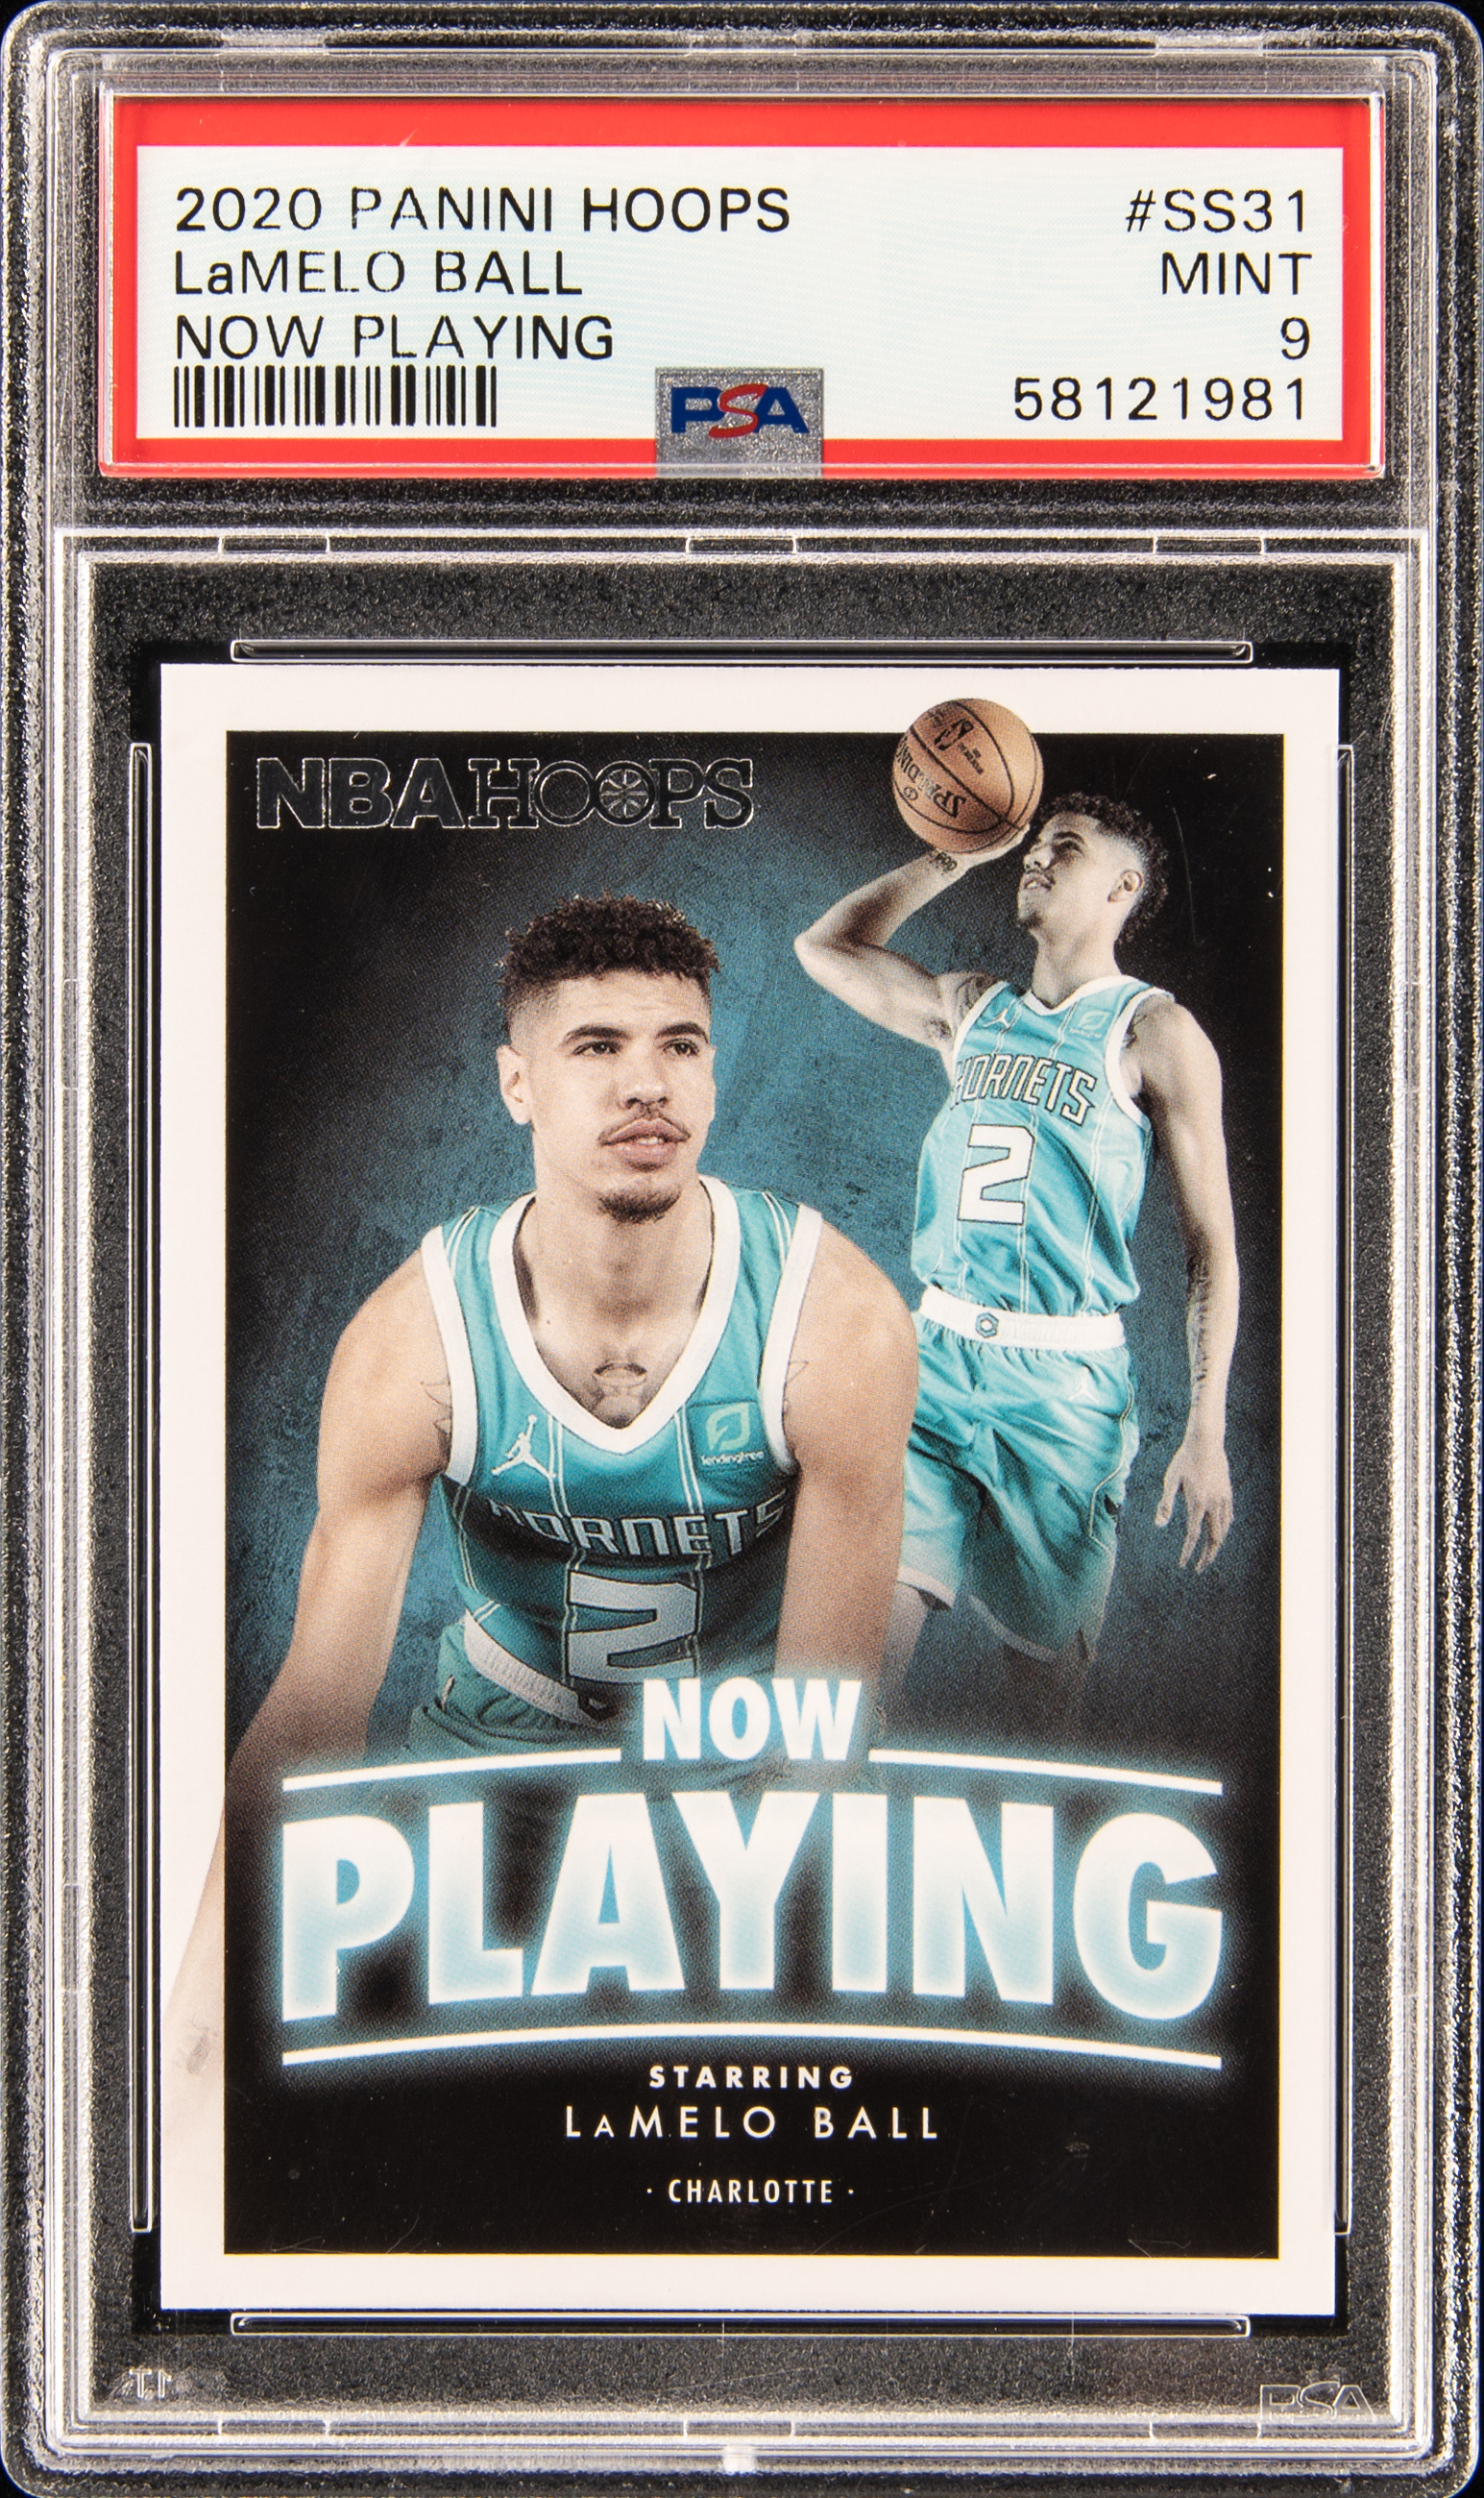 2020 Panini Hoops Now Playing Ss31 Lamelo Ball – PSA MINT 9